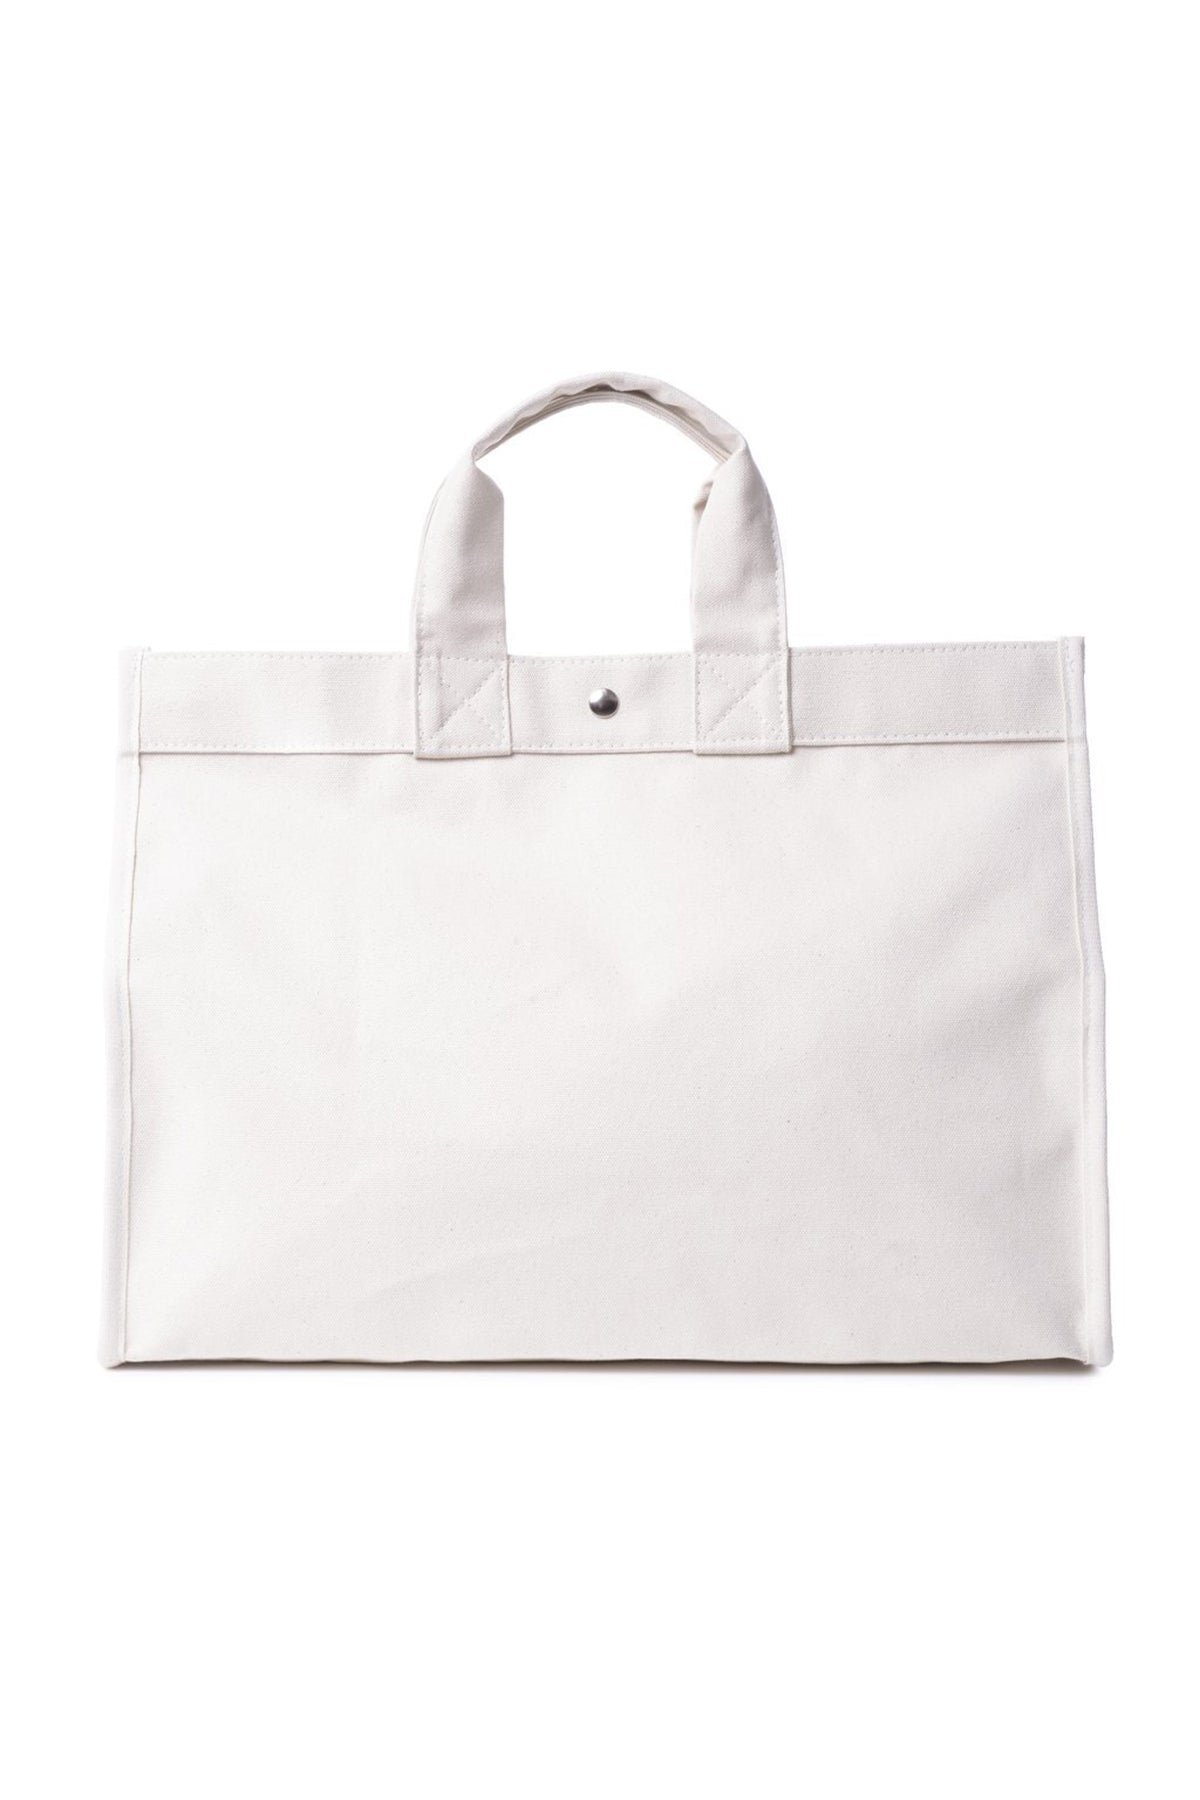   a CLASSIC FIELD BAG BY UTILITY CANVAS on a white background. 